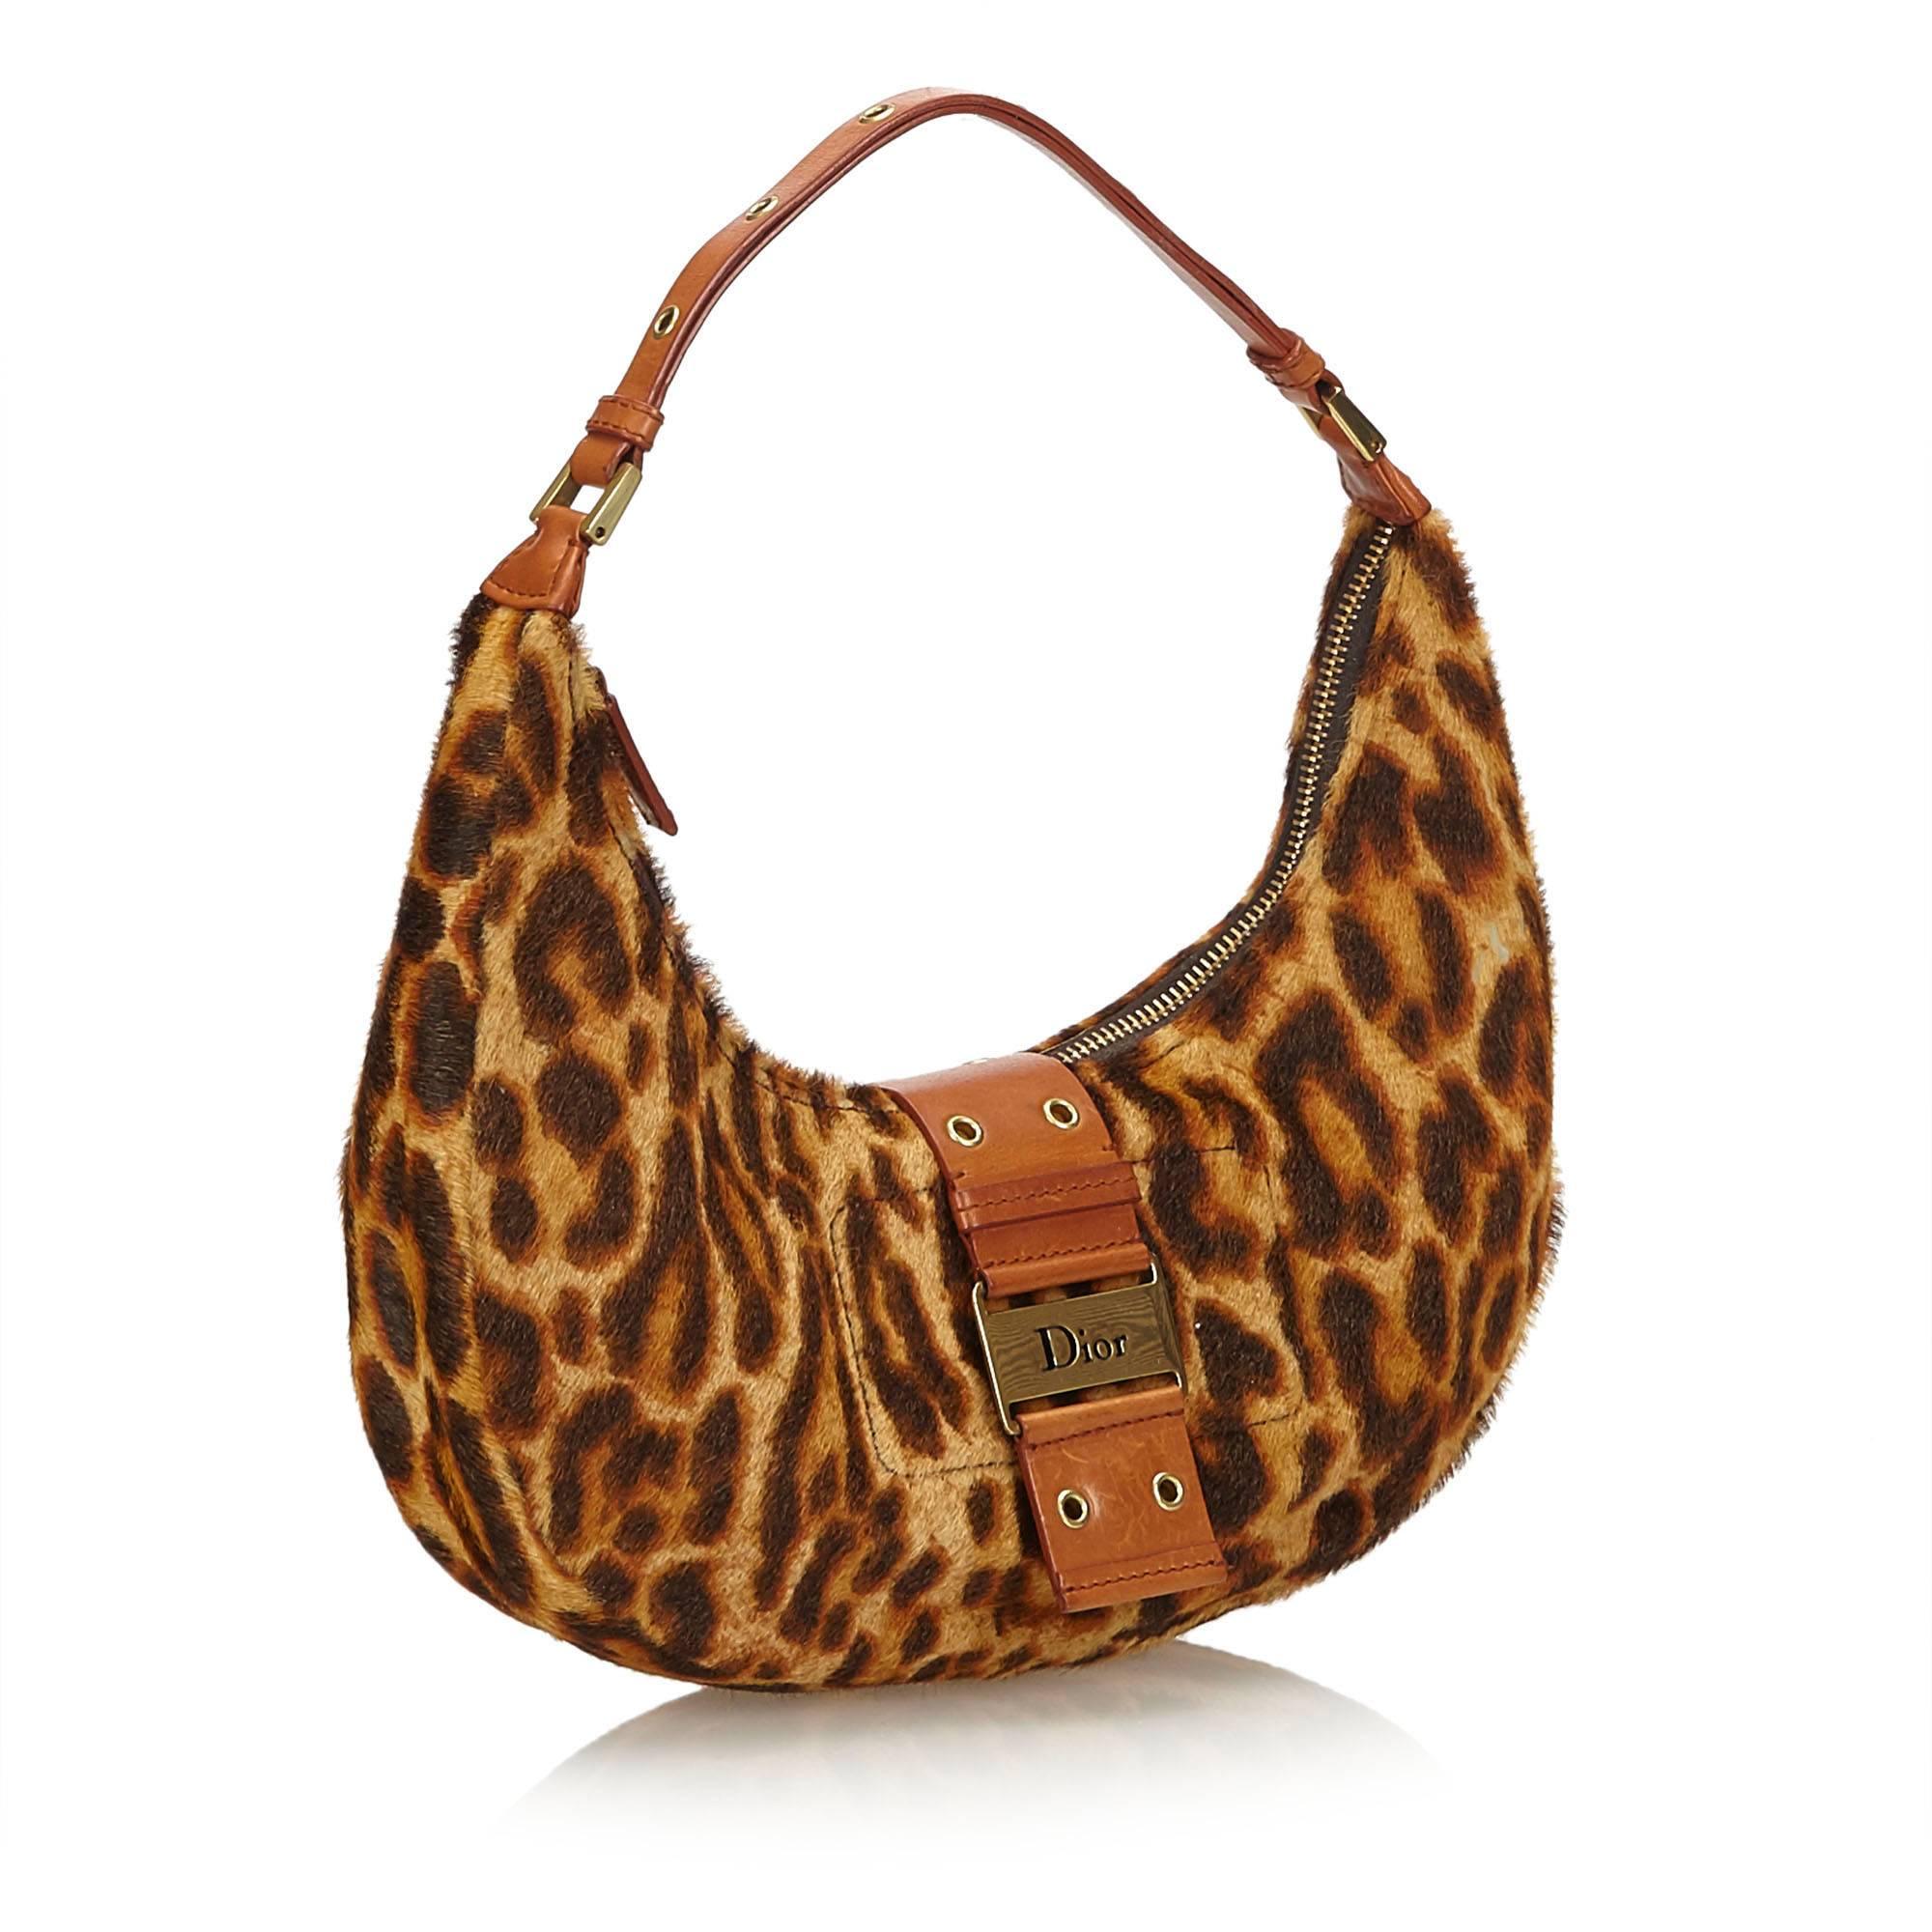 This handbag features a leopard print fur body, flat leather strap, top zip closure with front strap, and interior zip pocket. 

It carries a B+ condition rating.

Dimensions: 
Length 26 cm
Width 13 cm
Depth 6 cm
Hand Drop 16 cm

Inclusions: Dust